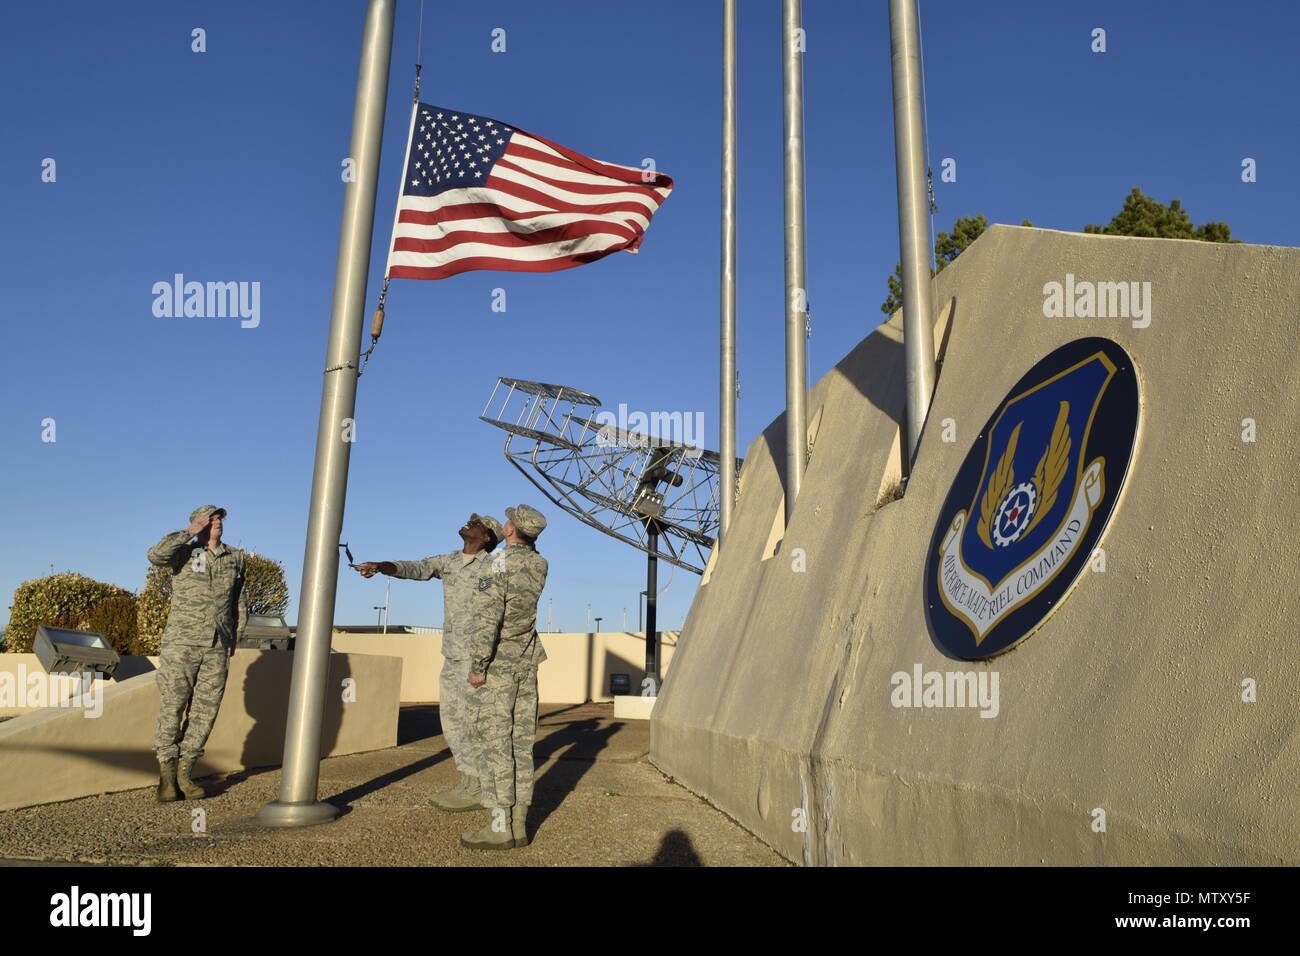 Military members of the Oklahoma City Air Logistics Complex lower the American flag from the base flag pole during an official retreat ceremony Jan. 24, 2017, Tinker Air Force Base, Oklahoma. OC-ALC  conducted the retreat ceremony as part of the official Tinker AFB 75th Anniversary events. Tinker hosts the Air Force Sustainment Center and falls under the Air Force Materiel Command. The AFMC badge is displayed on the wall.  (U.S. Air Force photo/Greg L. Davis) Stock Photo